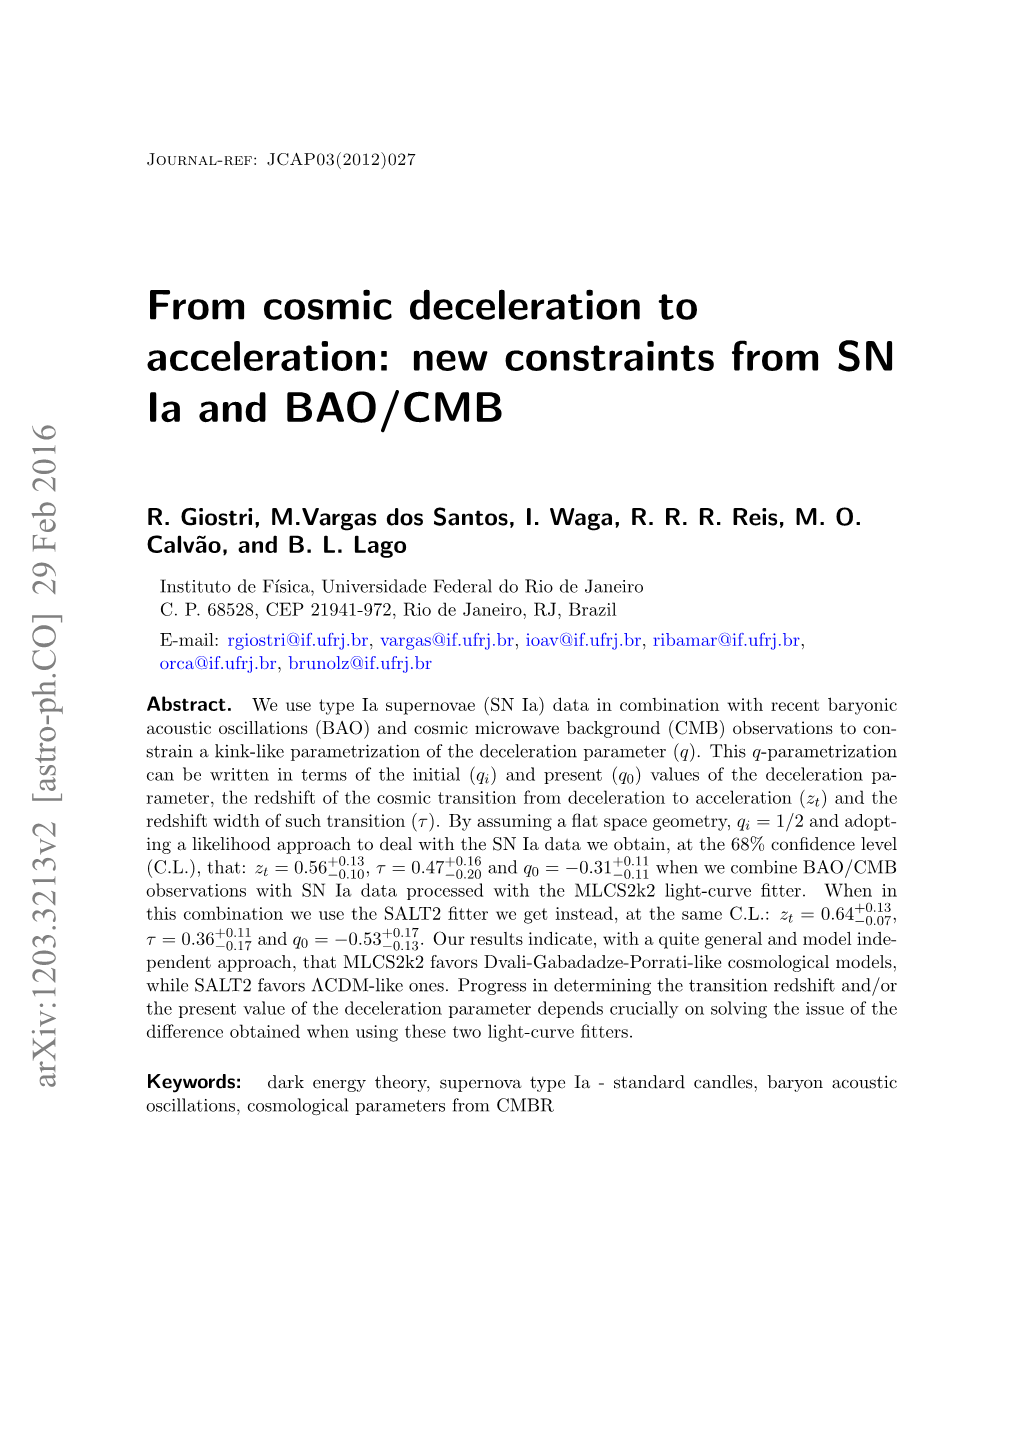 From Cosmic Deceleration to Acceleration: New Constraints from SN Ia and BAO/CMB